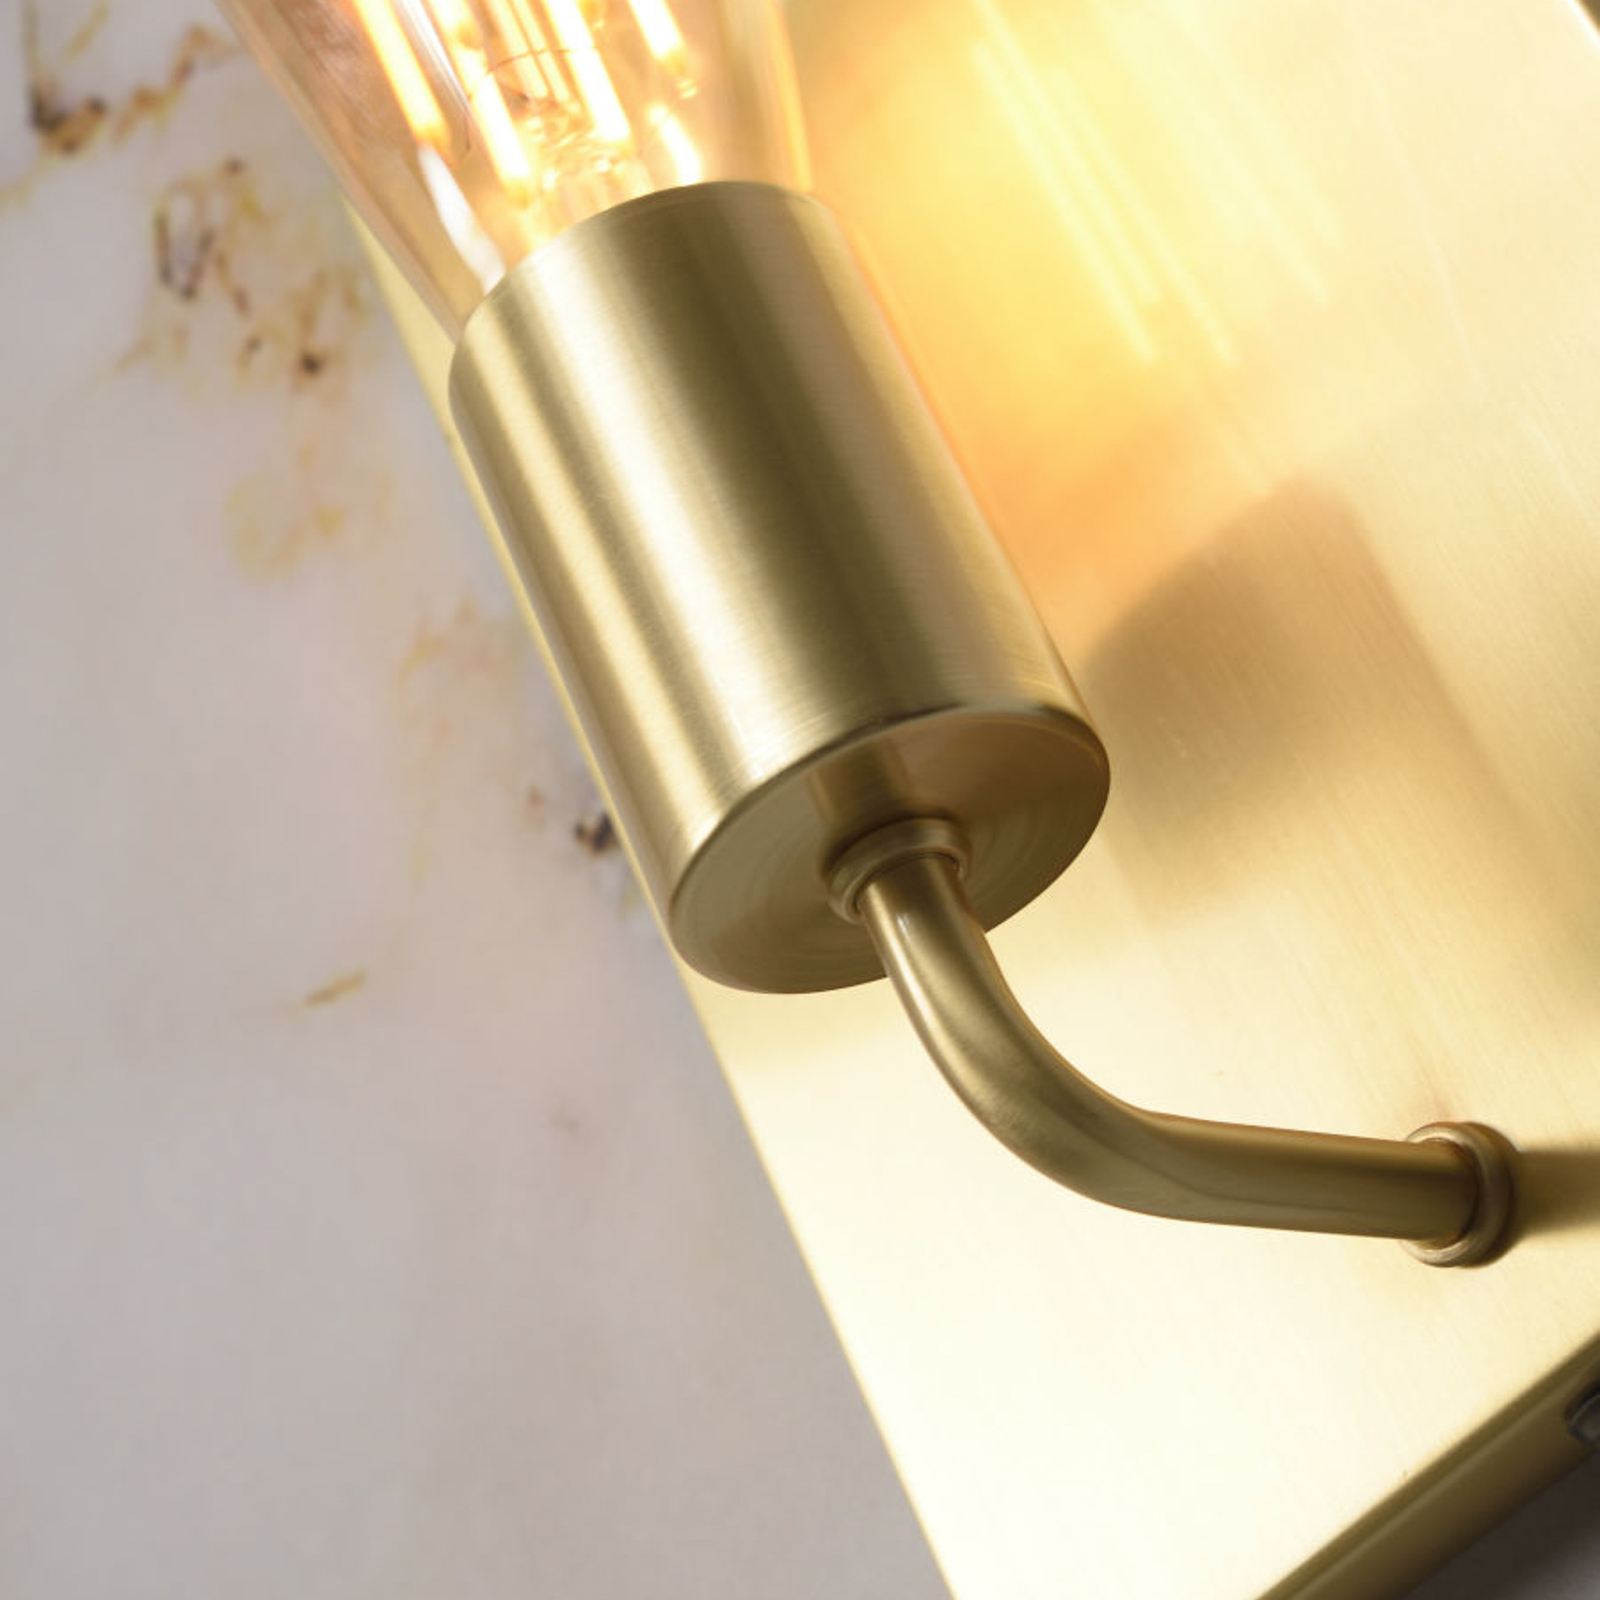 It’s about RoMi Madrid wall lamp, upwards, gold